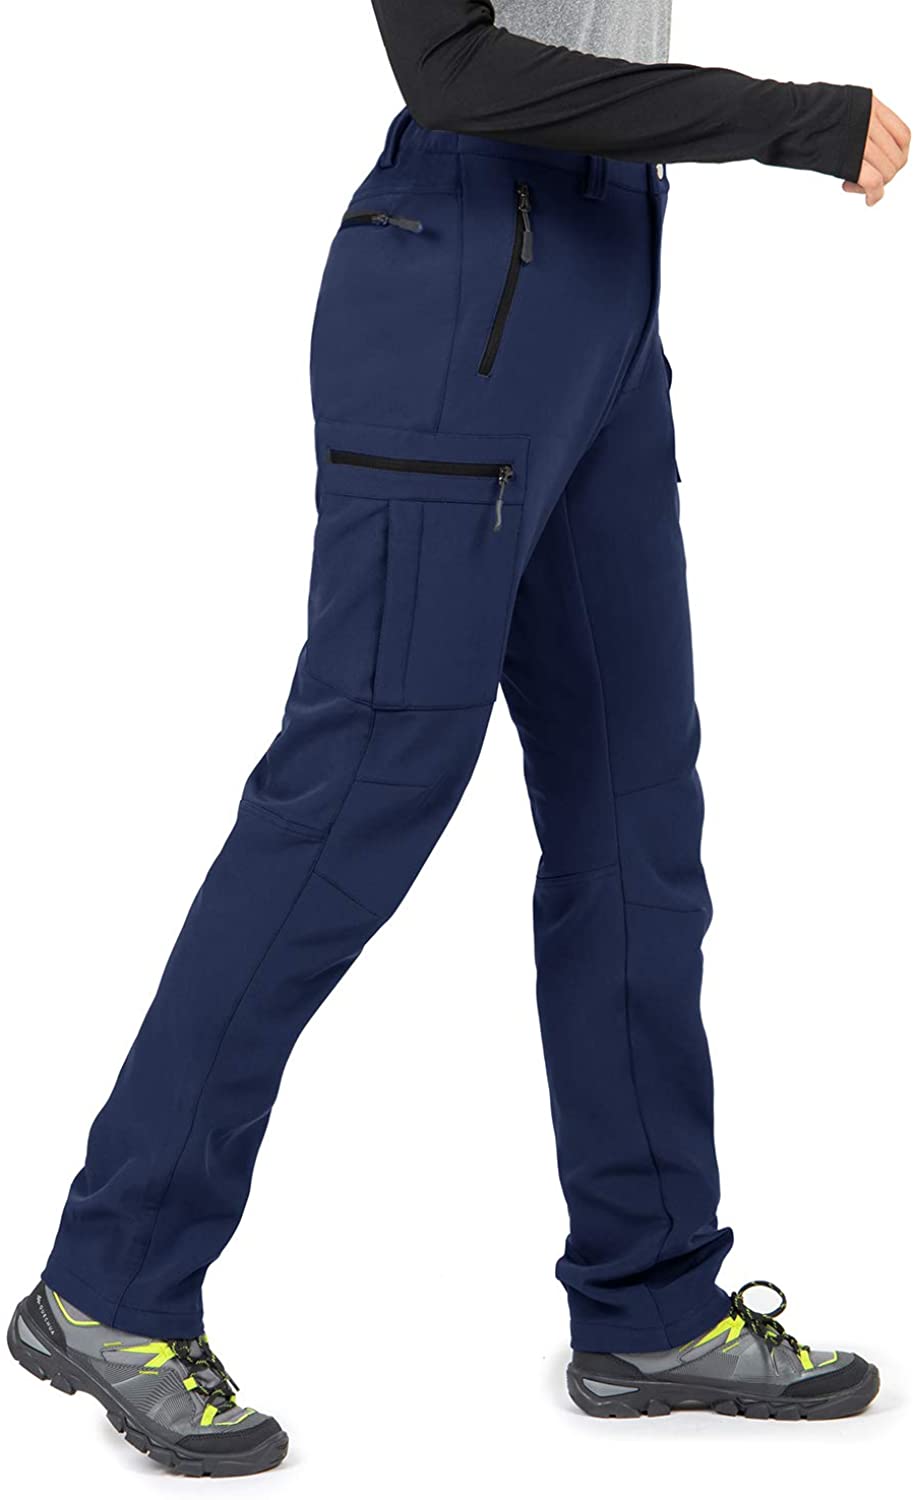 Women's Outdoor Fleece-Lined Soft Shell Hiking Fishing ski Pants Insulated  Water and Wind-Resistant (6080 Blue, 30)